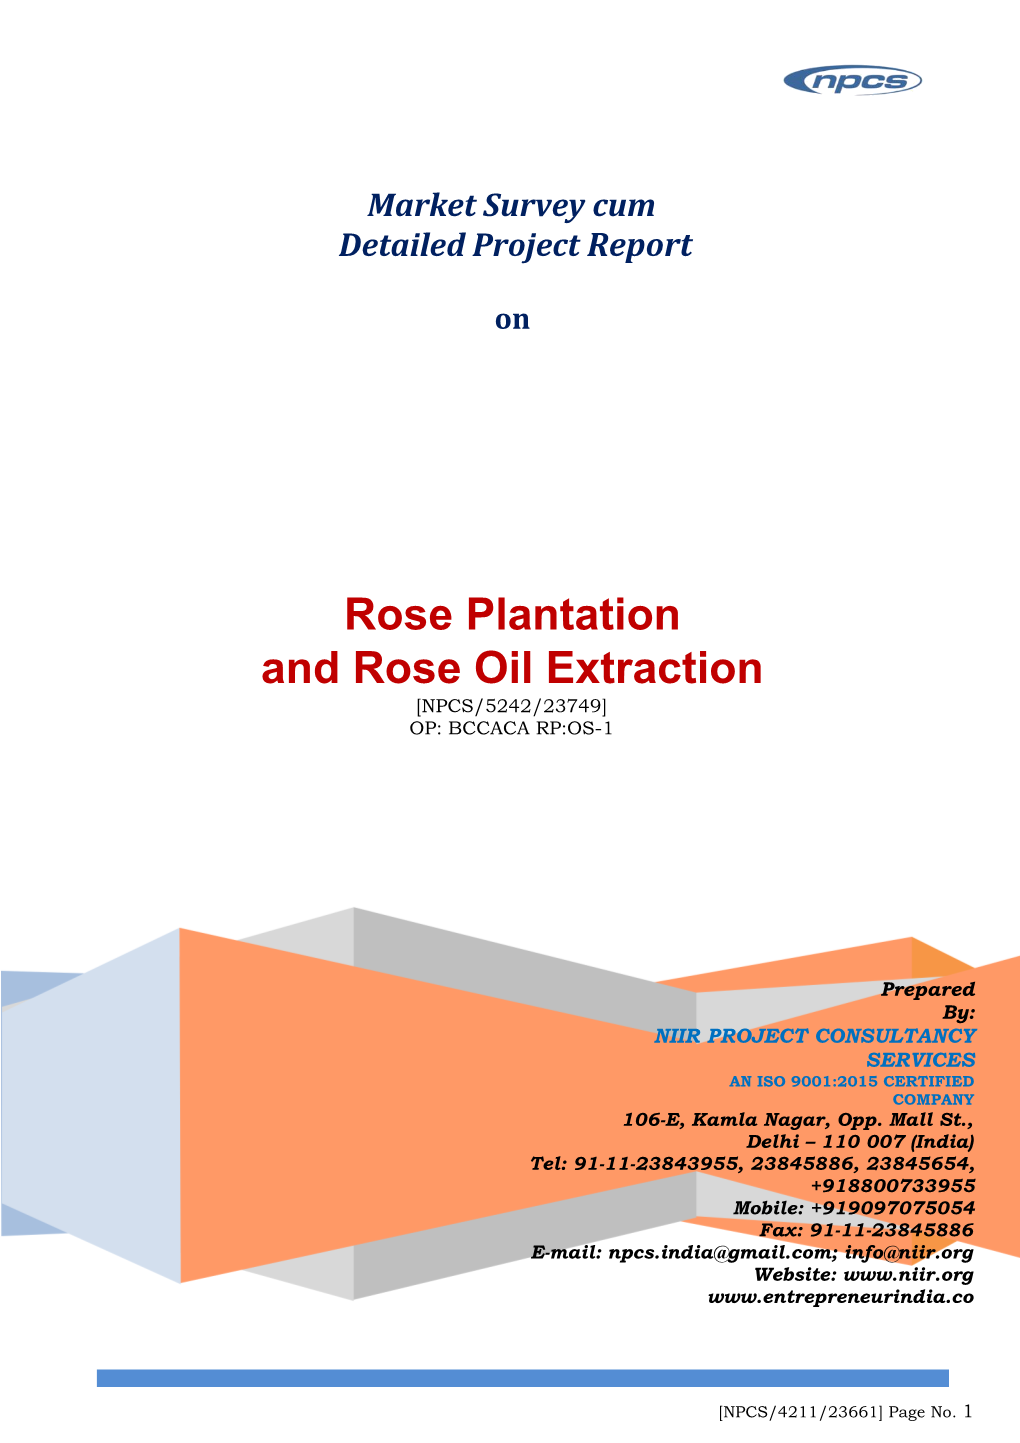 Rose Plantation and Rose Oil Extraction [NPCS/5242/23749] OP: BCCACA RP:OS-1